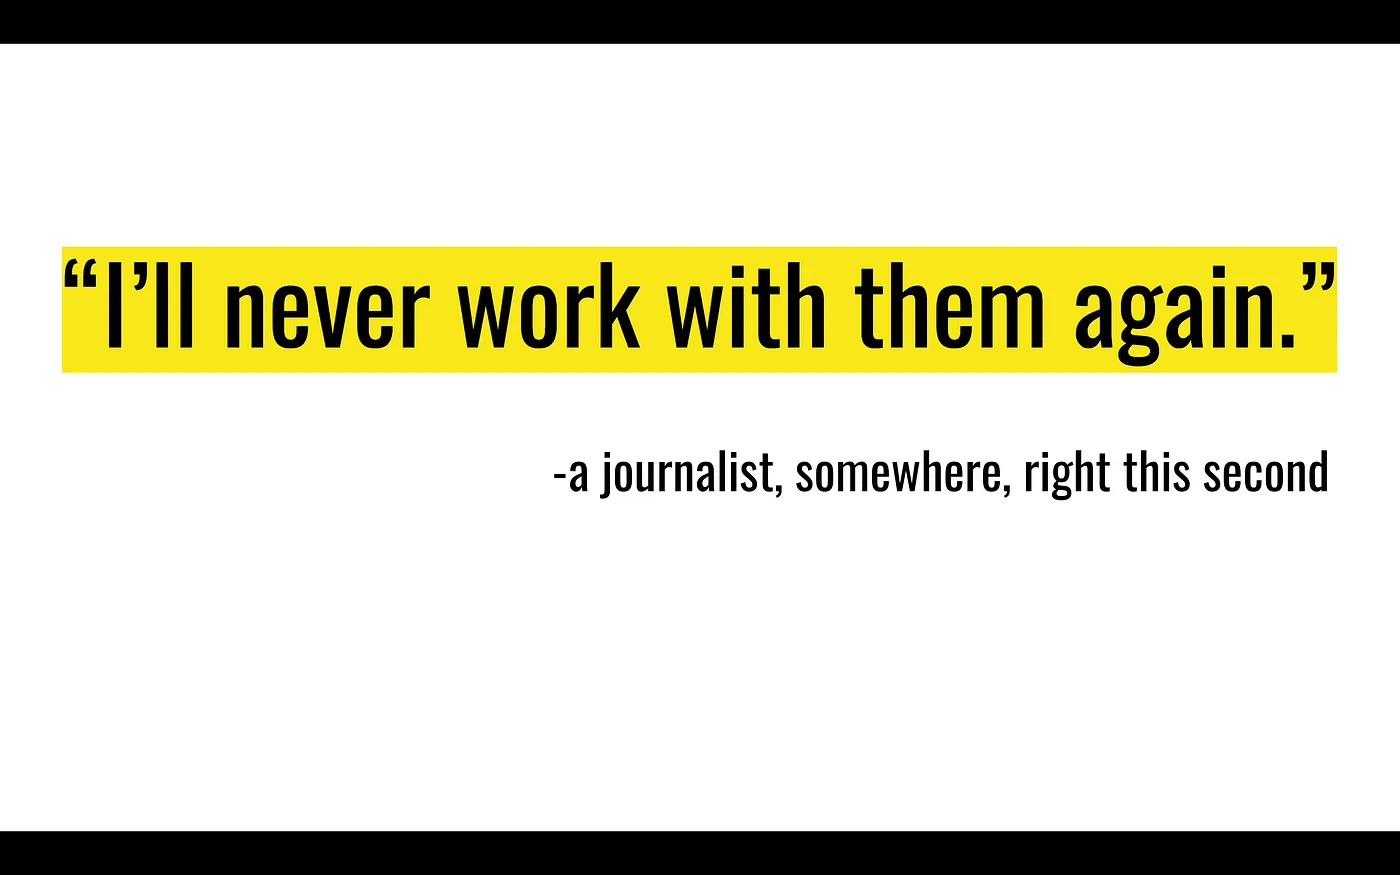 An image of a quote saying" I'll never work with them again" attributed to "a journalist, somewhere, right this second"